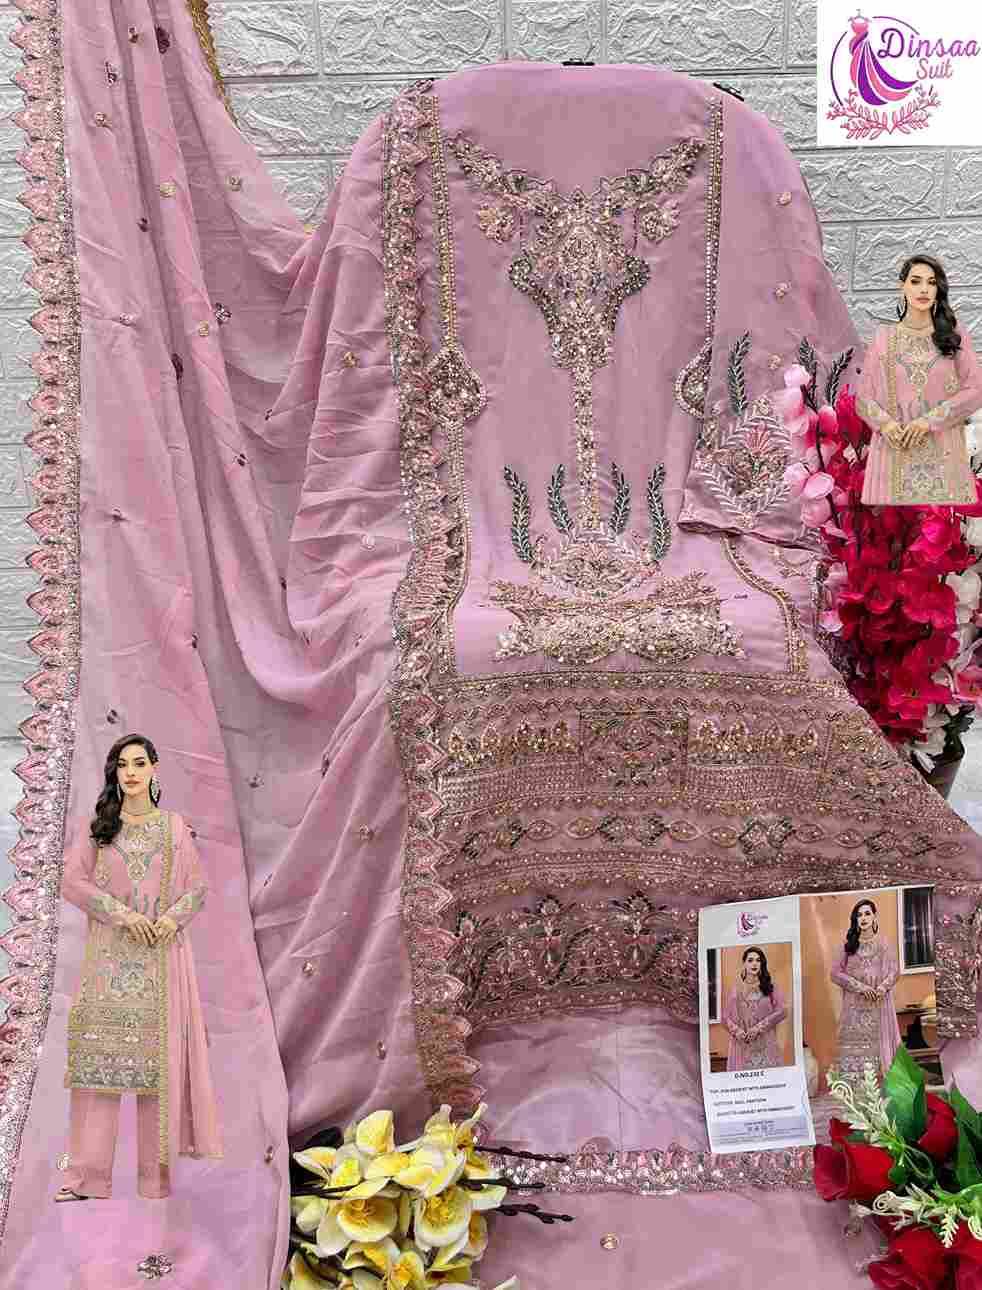 Dinsaa Hit Design 232 Colours By Dinsaa Suits 232-A To 232-D Series Designer Pakistani Suits Beautiful Stylish Fancy Colorful Party Wear & Occasional Wear Heavy Georgette Dresses At Wholesale Price